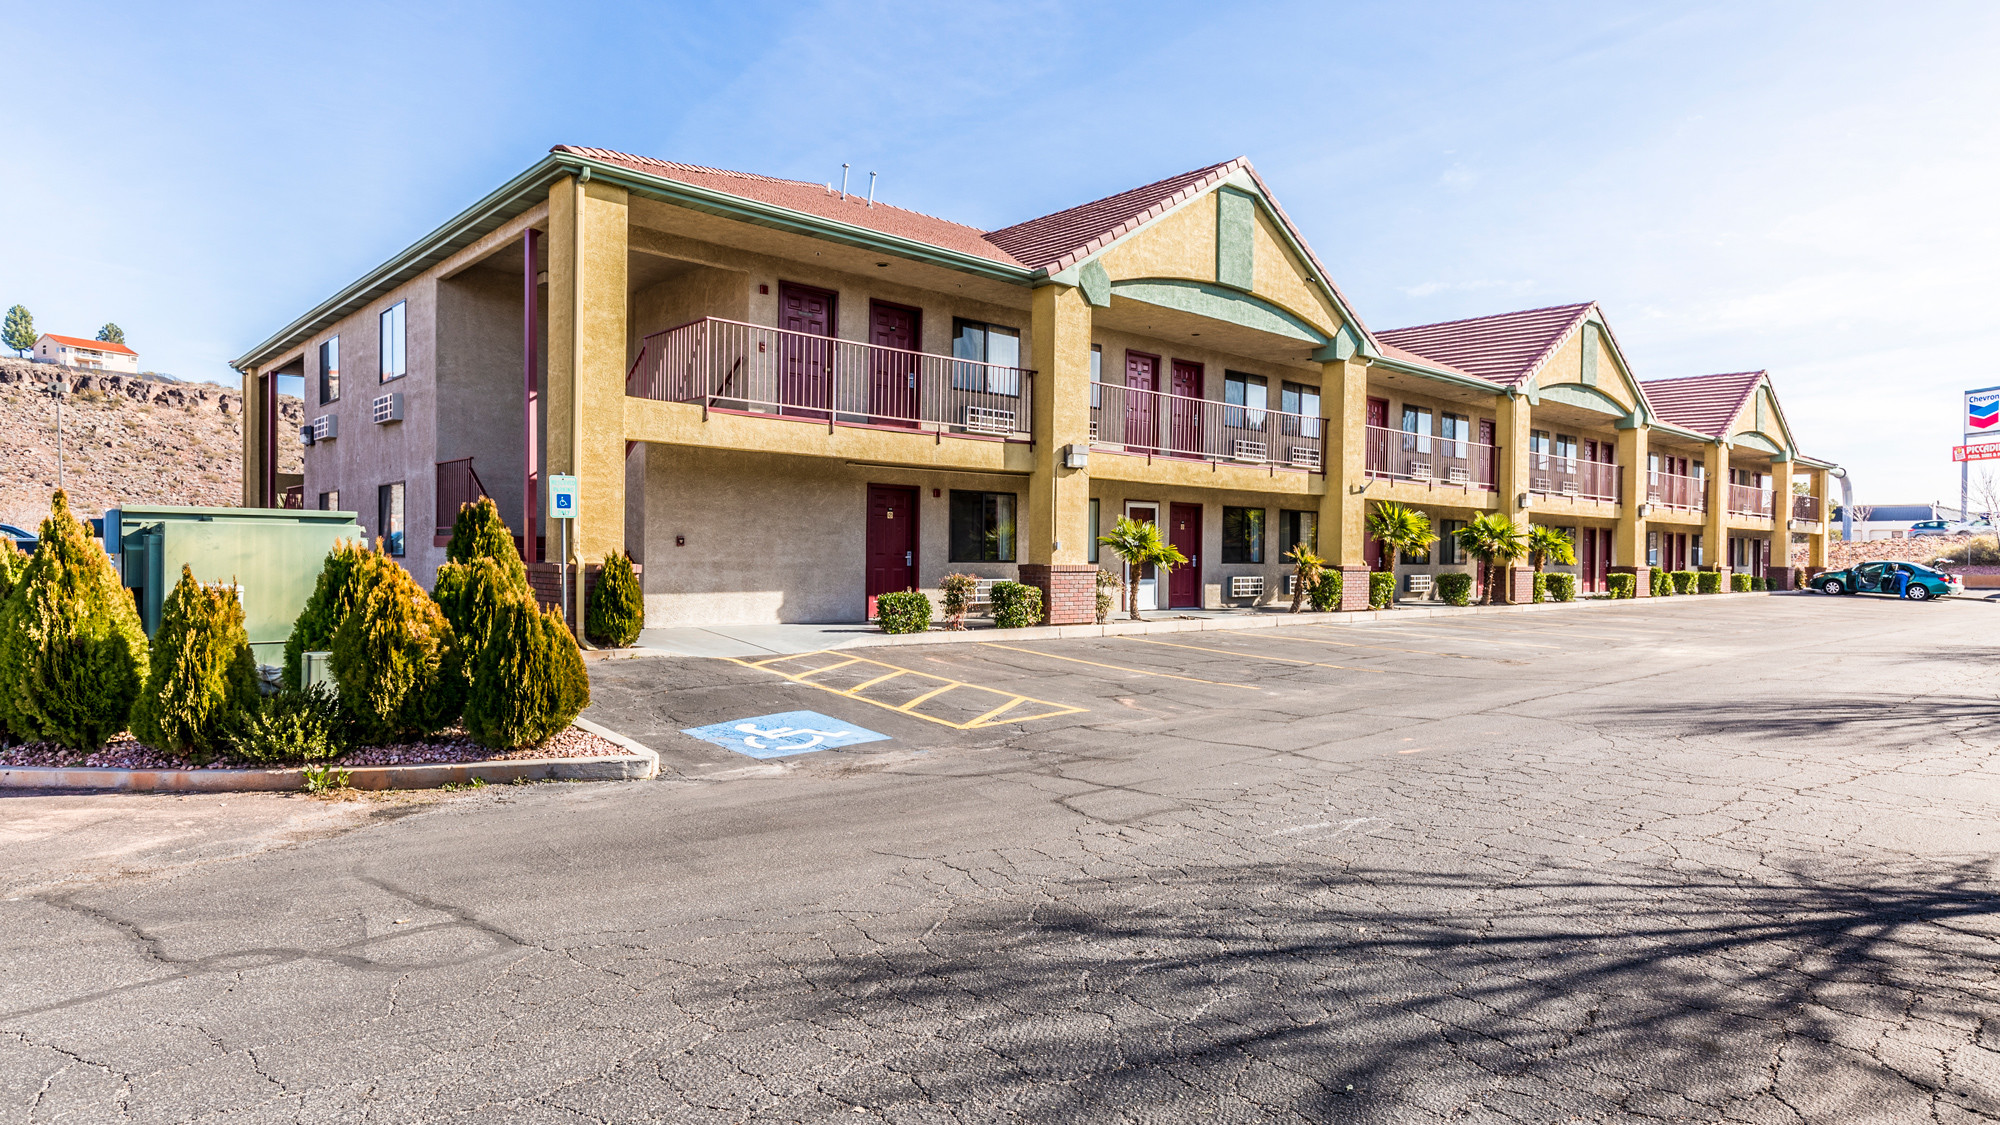 Americas Best Value Inn located in Saint George was sold by commercial real estate company NAI Excel